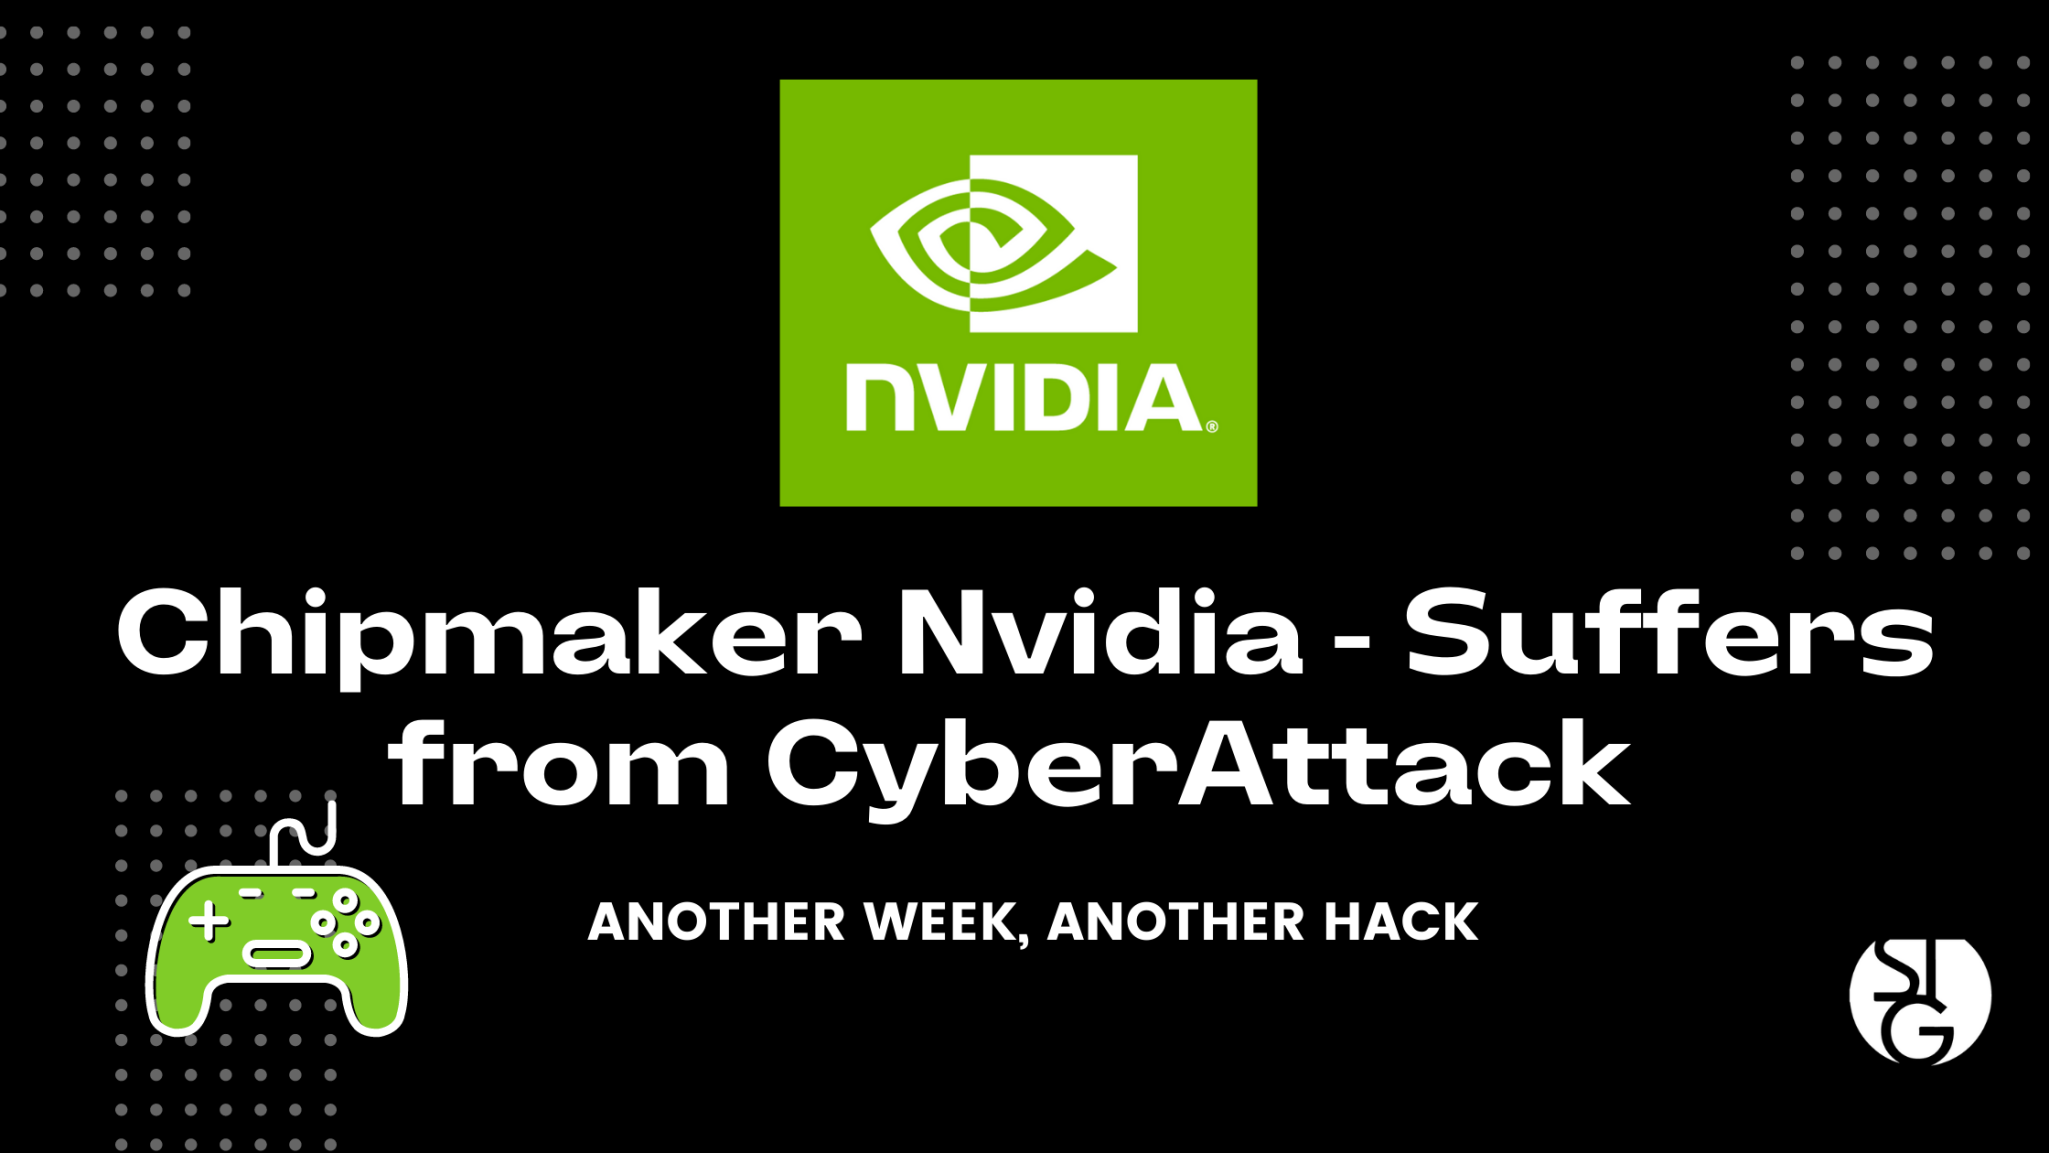 Chipmaking Giant Nvidia Suffers from Cyberattack